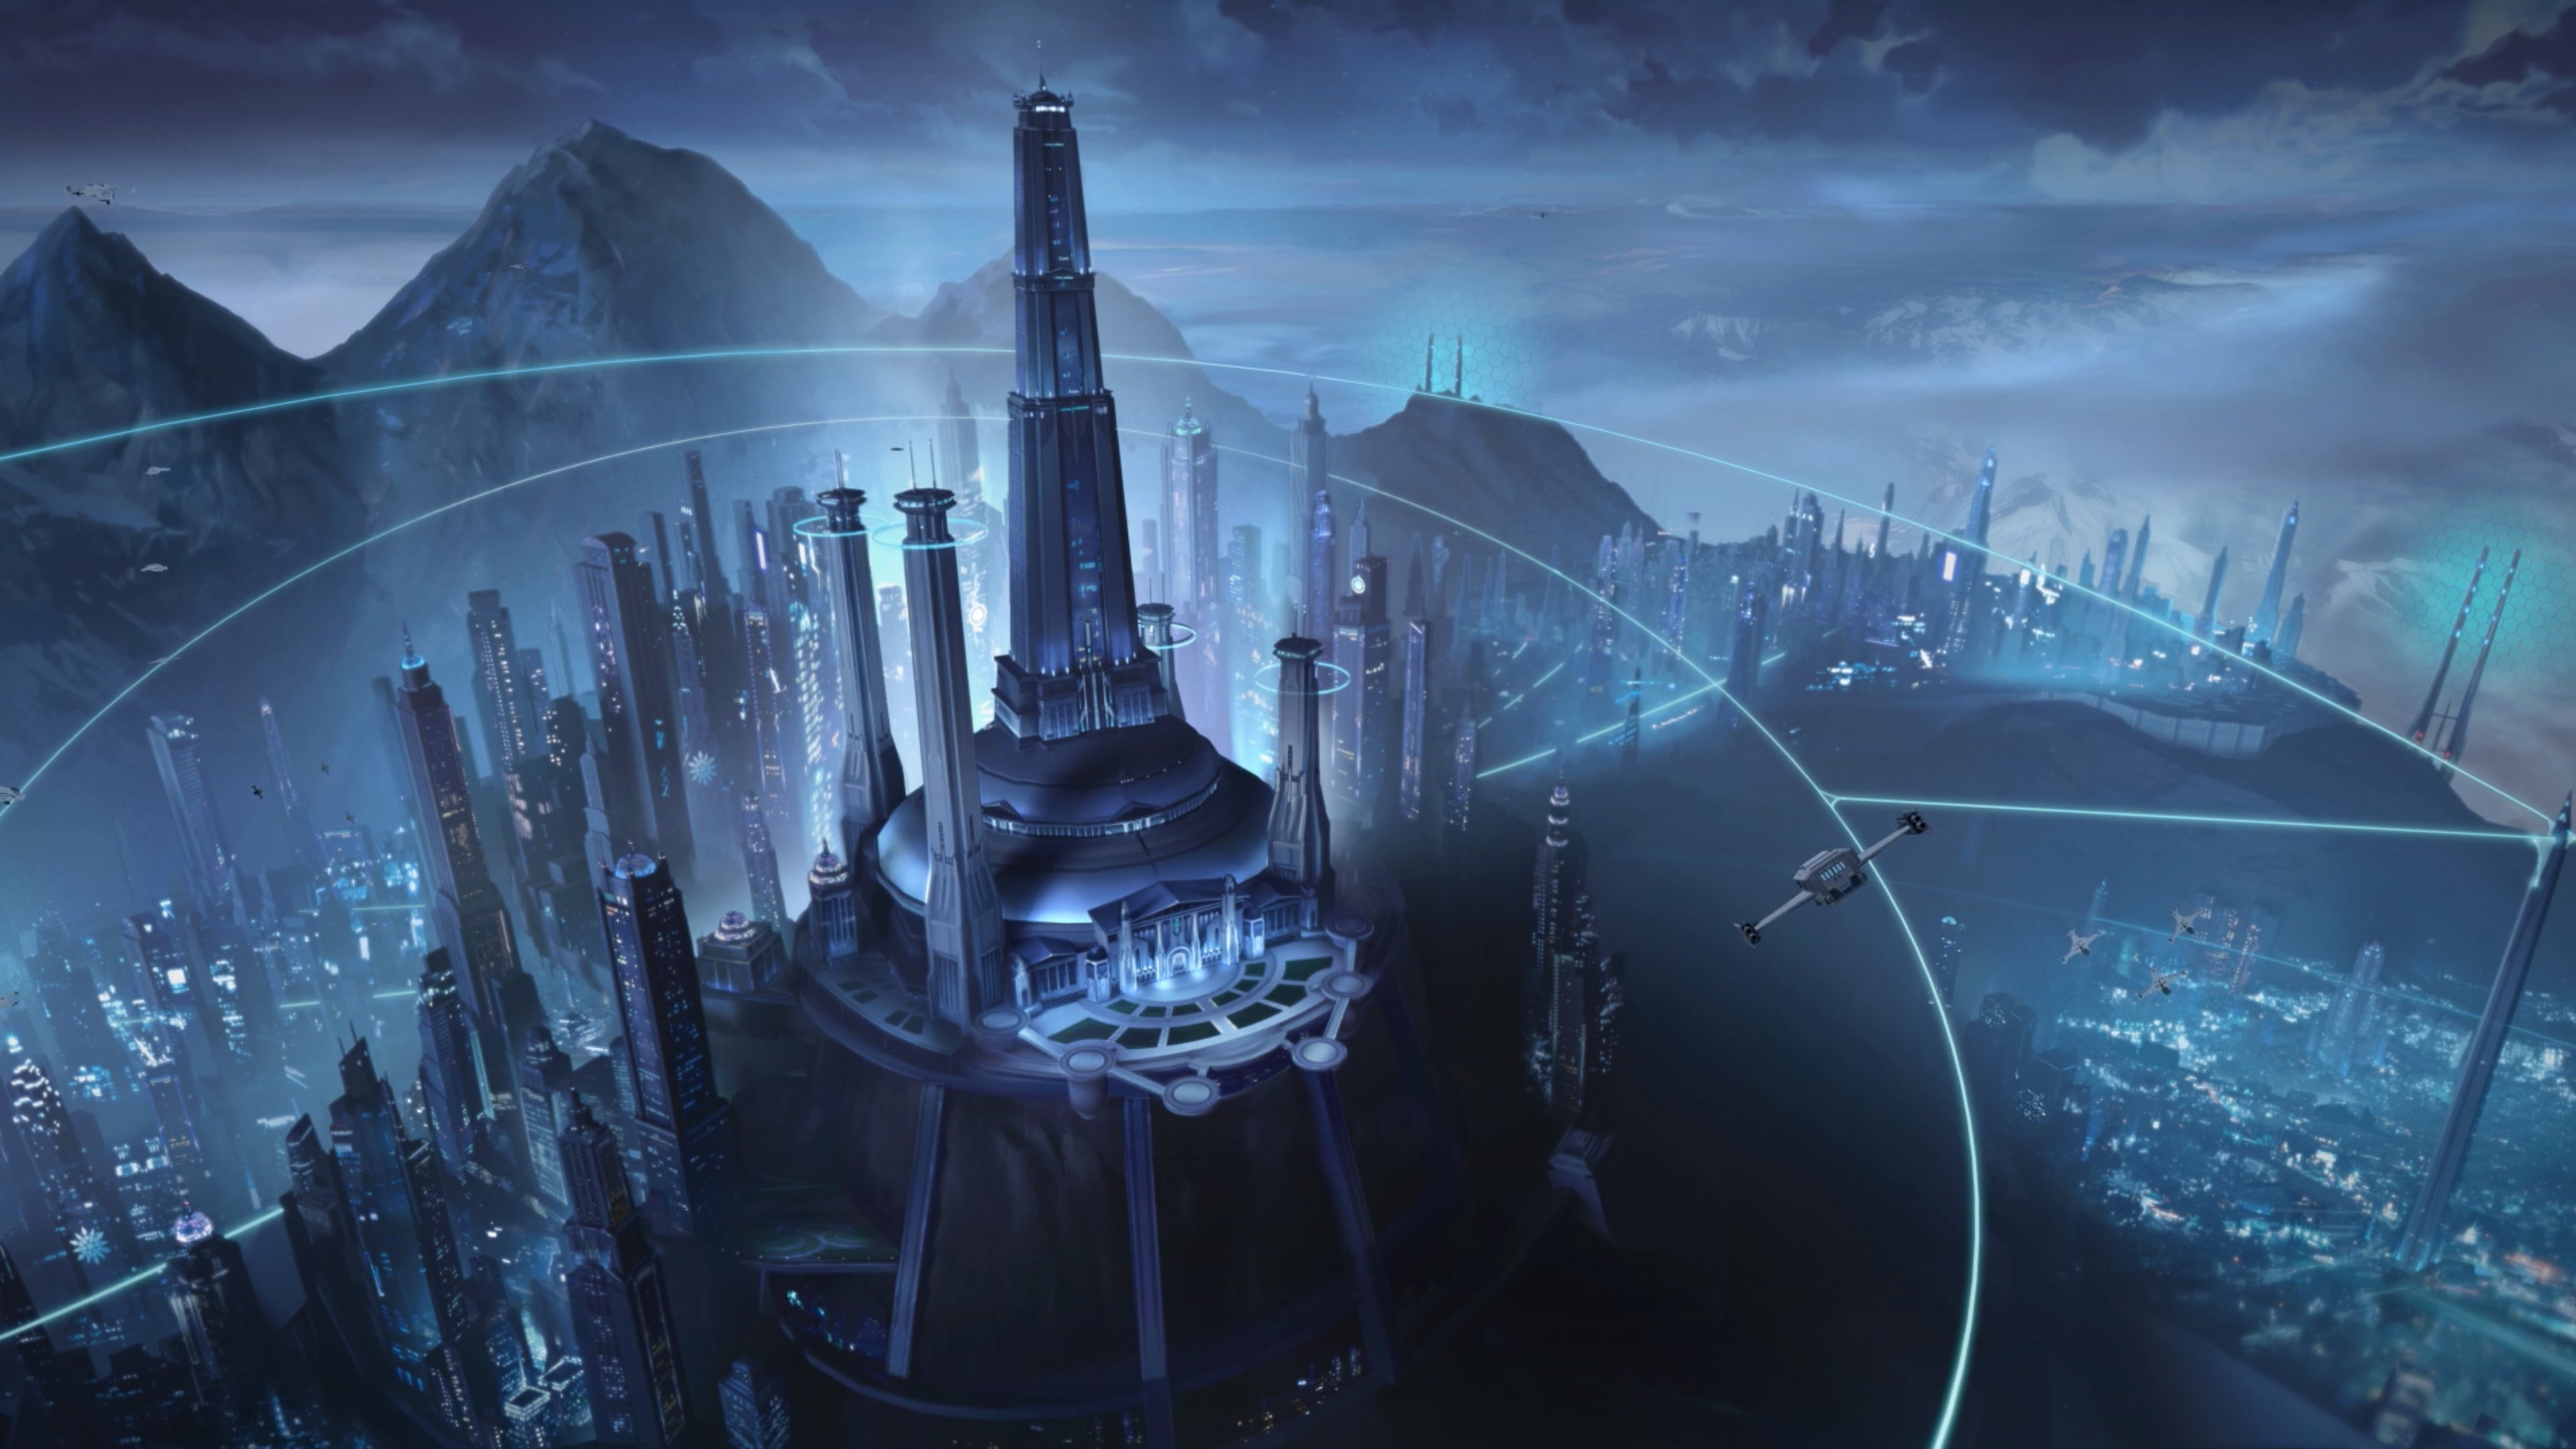 Atlas Academy, surrounded by the city of Atlas.